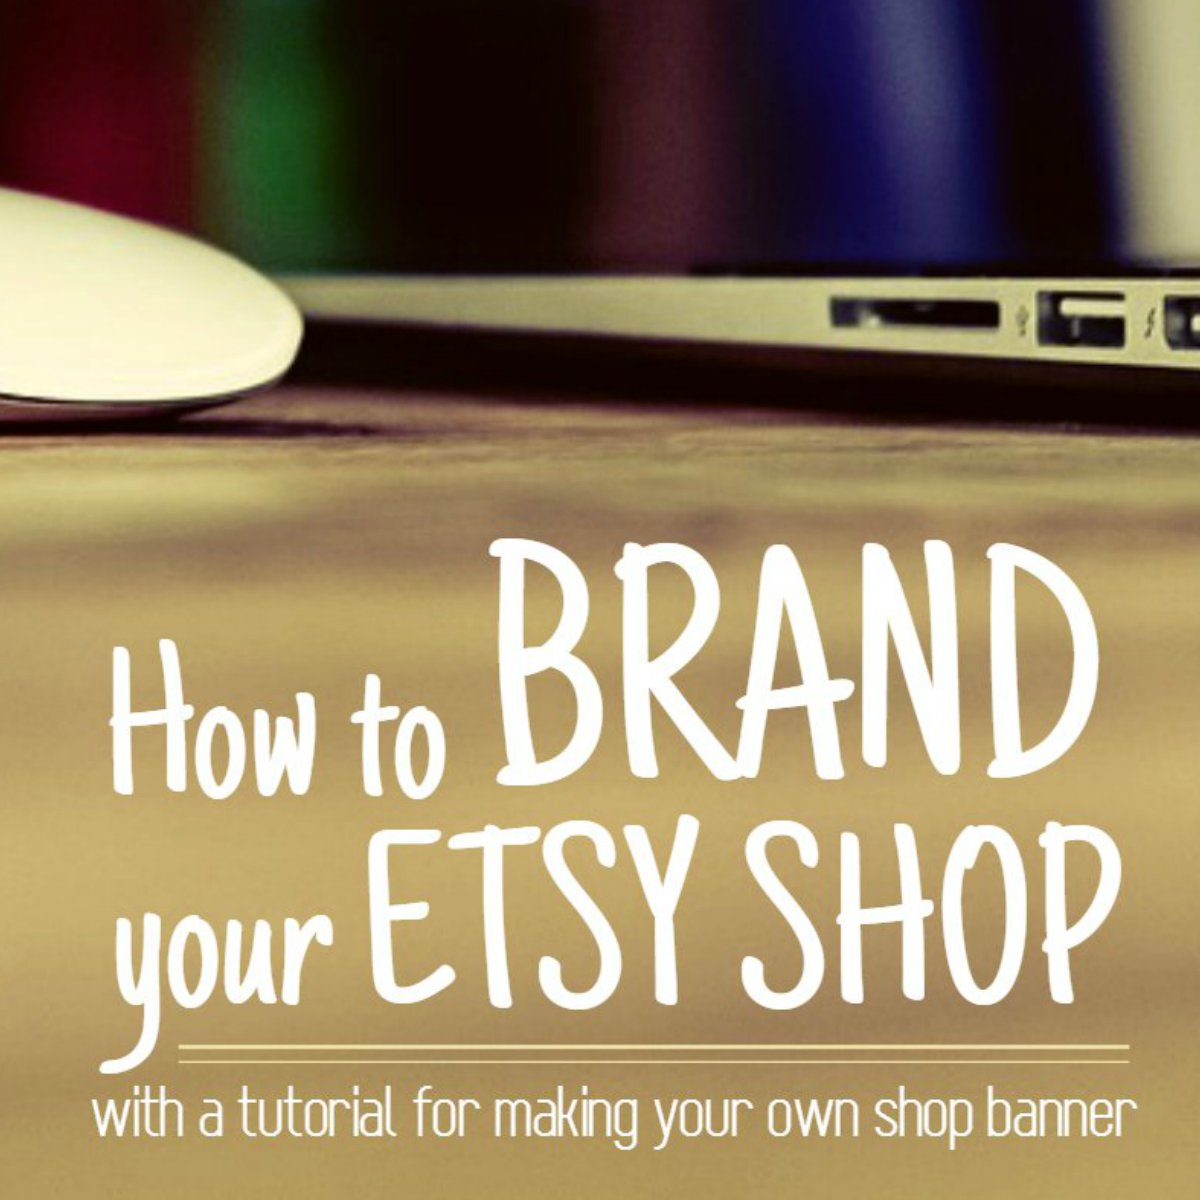 Looking for tips for selling on Etsy? Read how to brand you Etsy shop, plus a step-by-step tutorial for how to make an Etsy shop header using Befunky